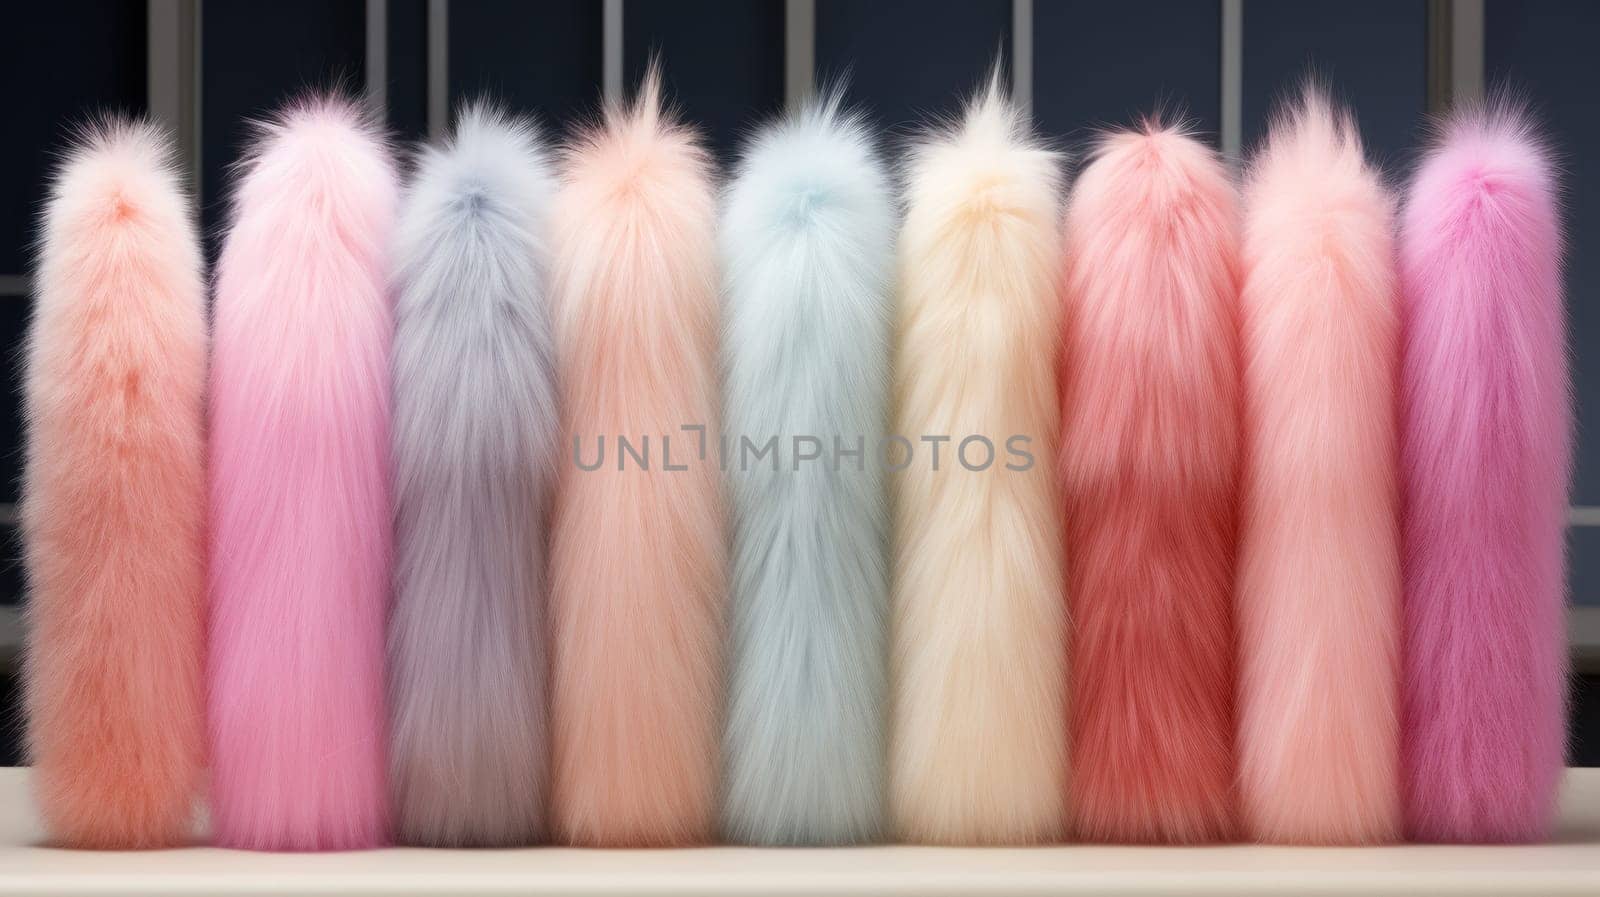 A row of colorful fur coats lined up on a table, AI by starush